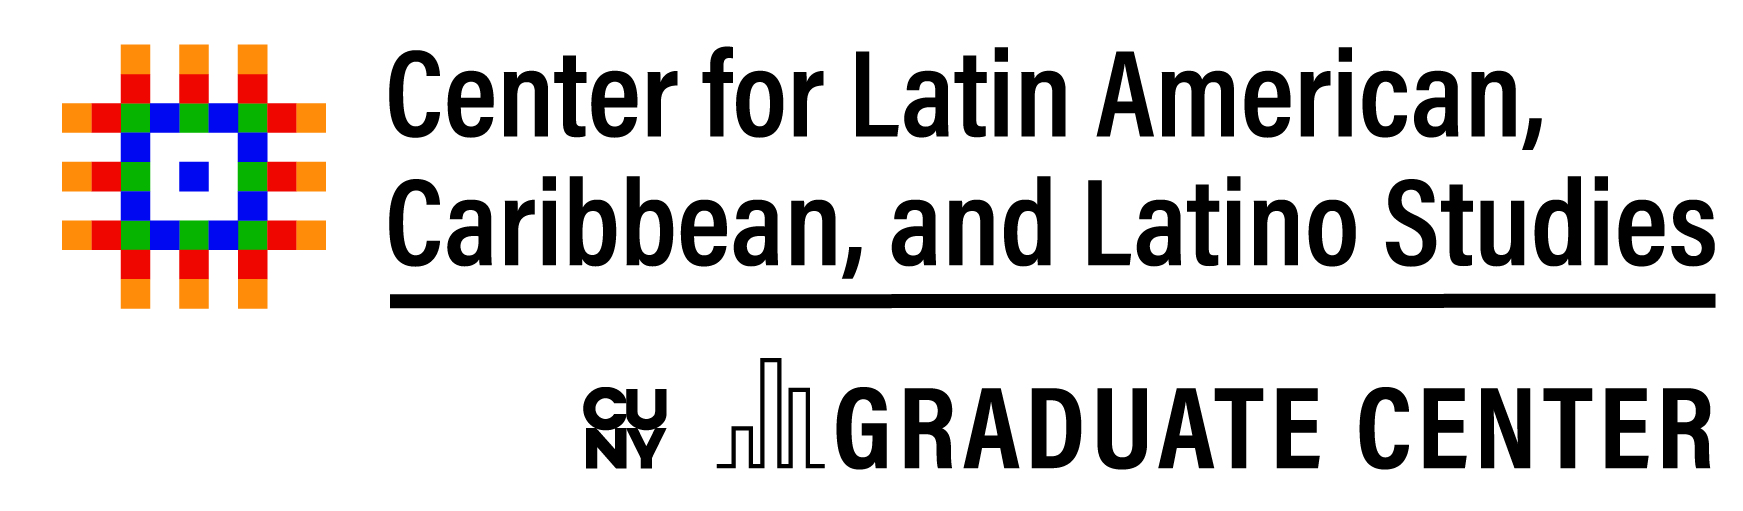 Center for Latin American, Caribbean, and Latino Studies